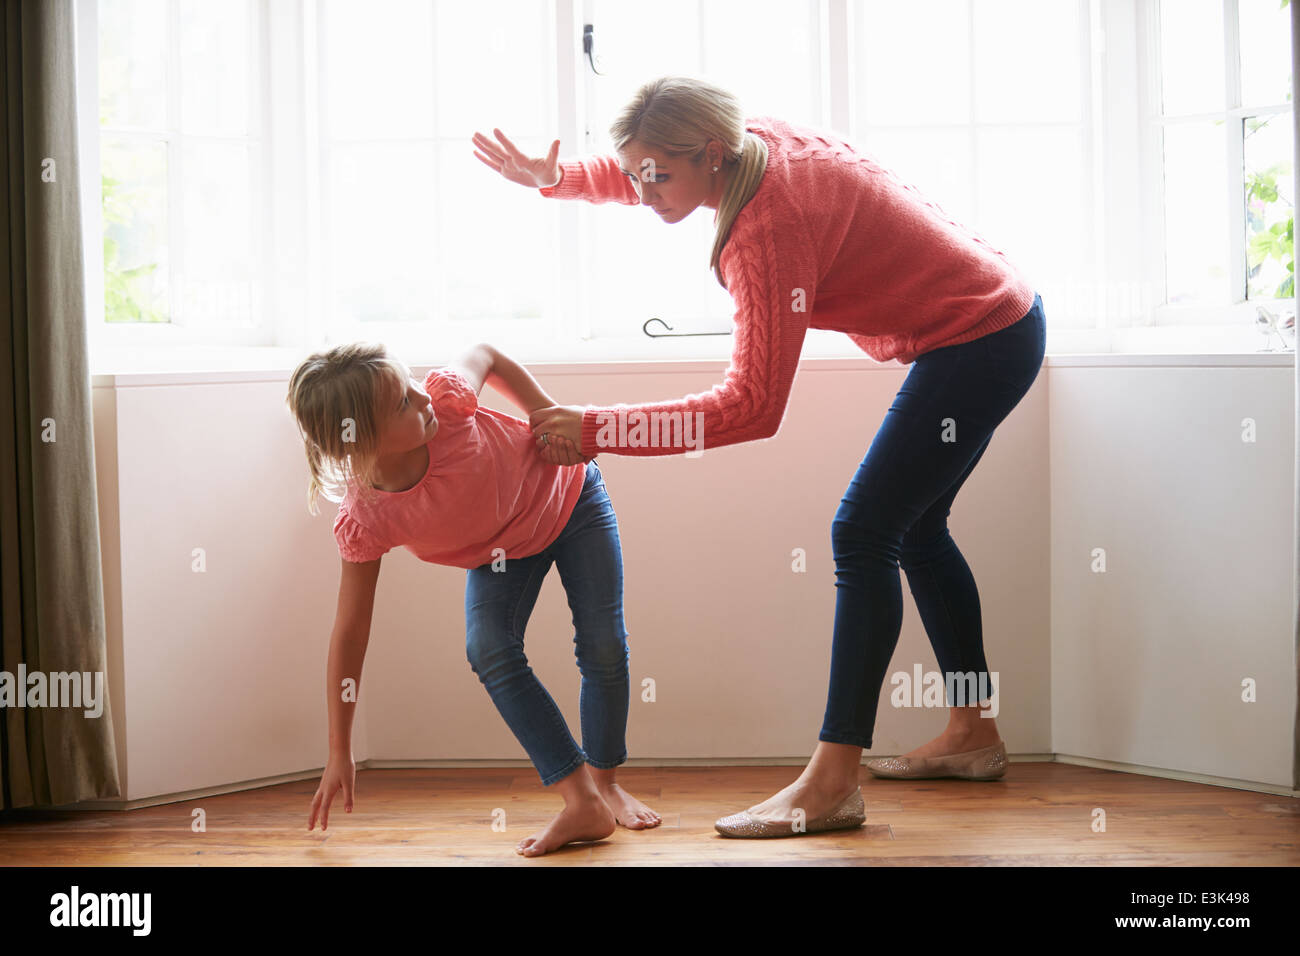 Mother Hitting Young Daughter Stock Photo